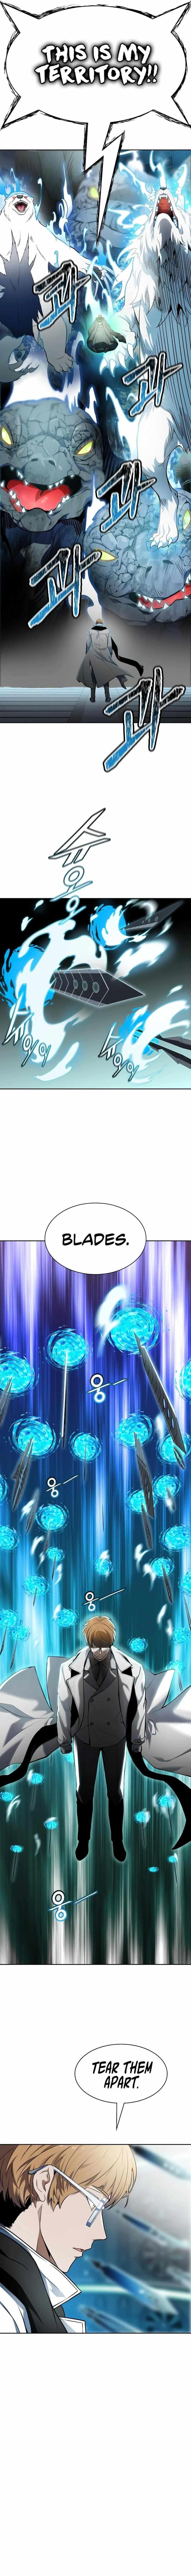 Tower Of God Chapter 575 Read Tower Of God Chapter 575 - Manganelo